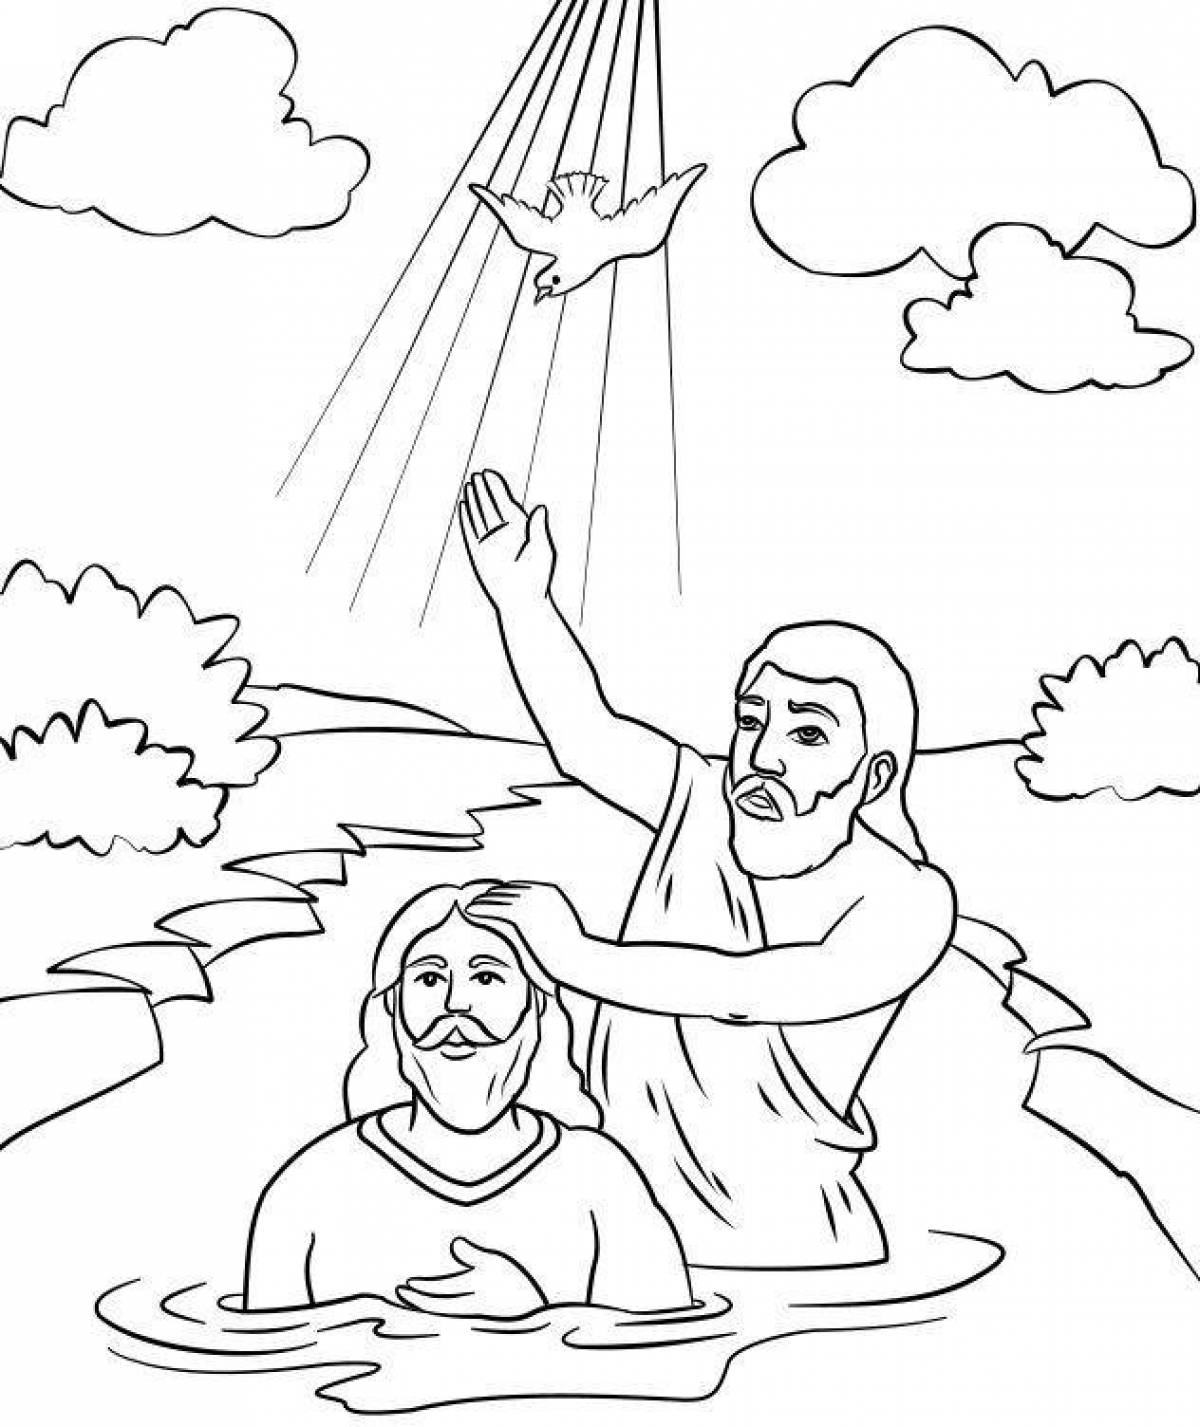 Color-frenzy baptism coloring page for kids